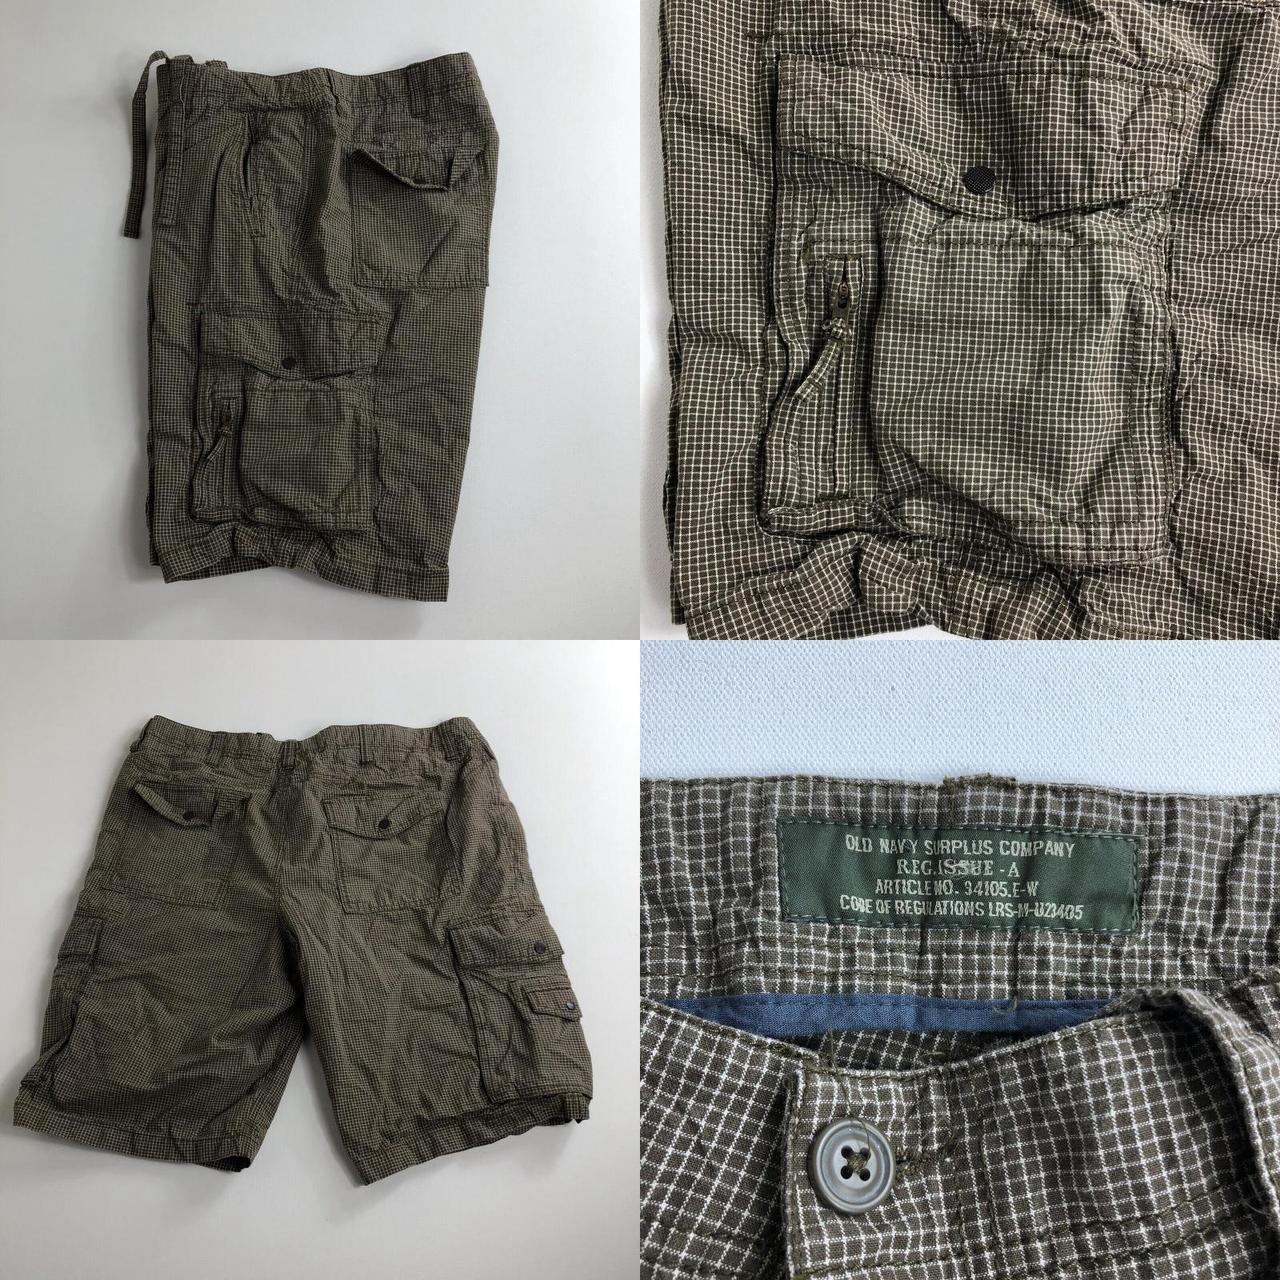 Product Image 4 - Men's OLD NAVY Surplus Company